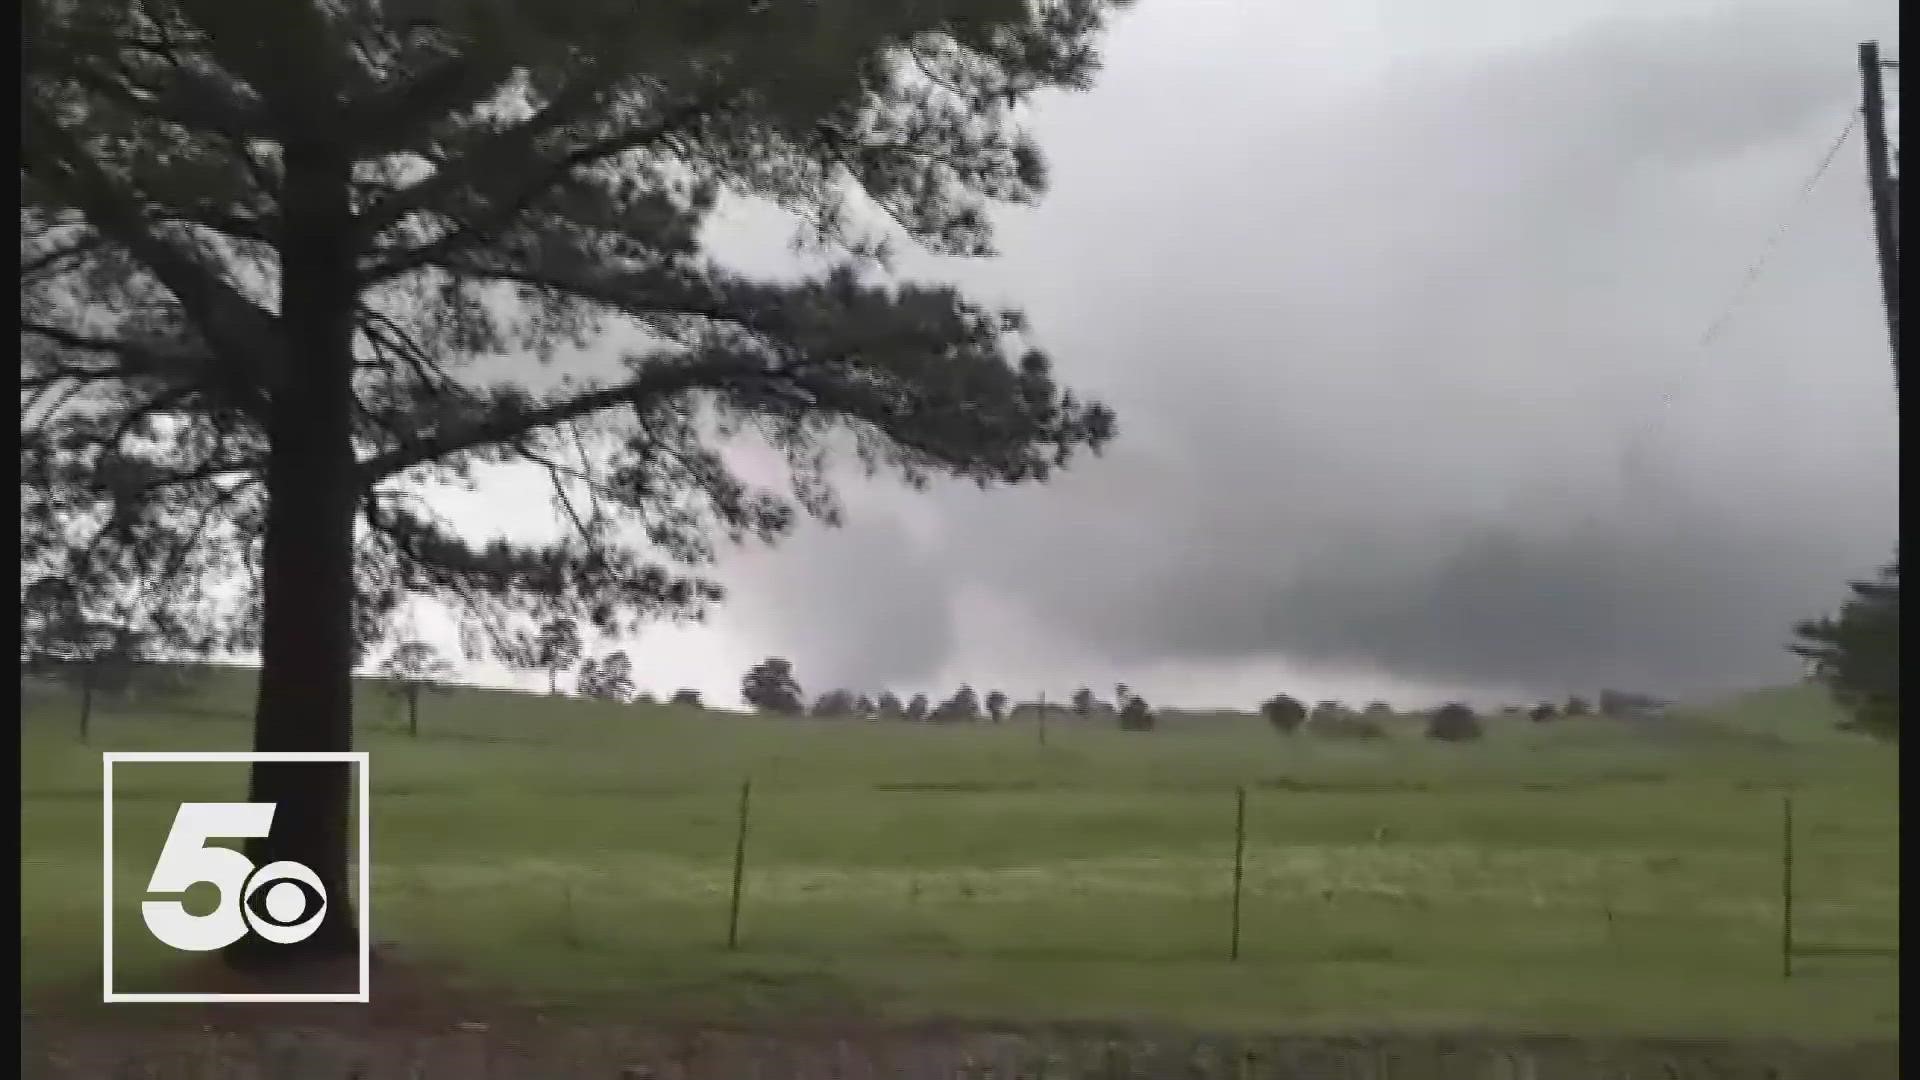 5NEWS viewer Jimmy Kendall captured this video of a tornado in Monroe, Okla.